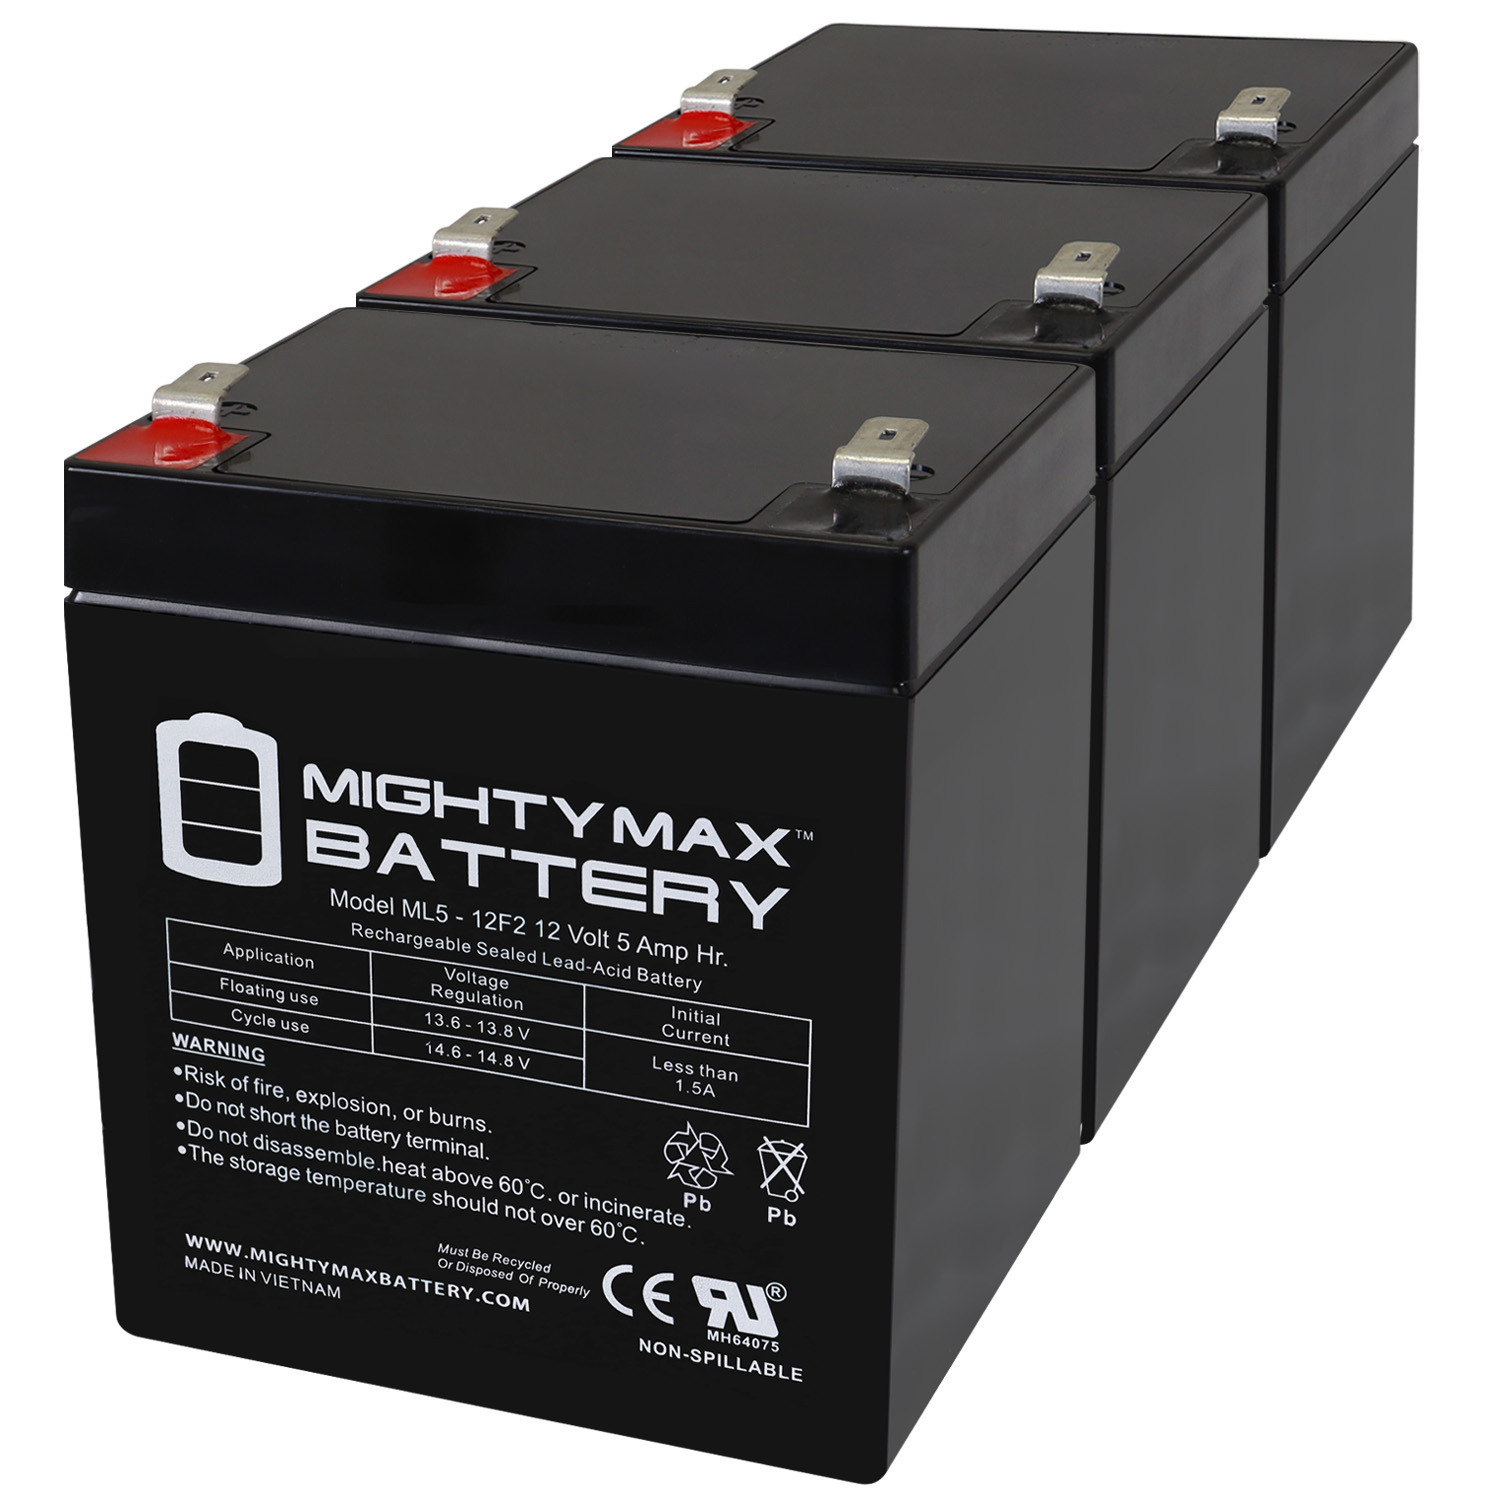 12V 5Ah F2 SLA Replacement Battery for Tripp Lite SU6000RT4UHVPM - 3 Pack